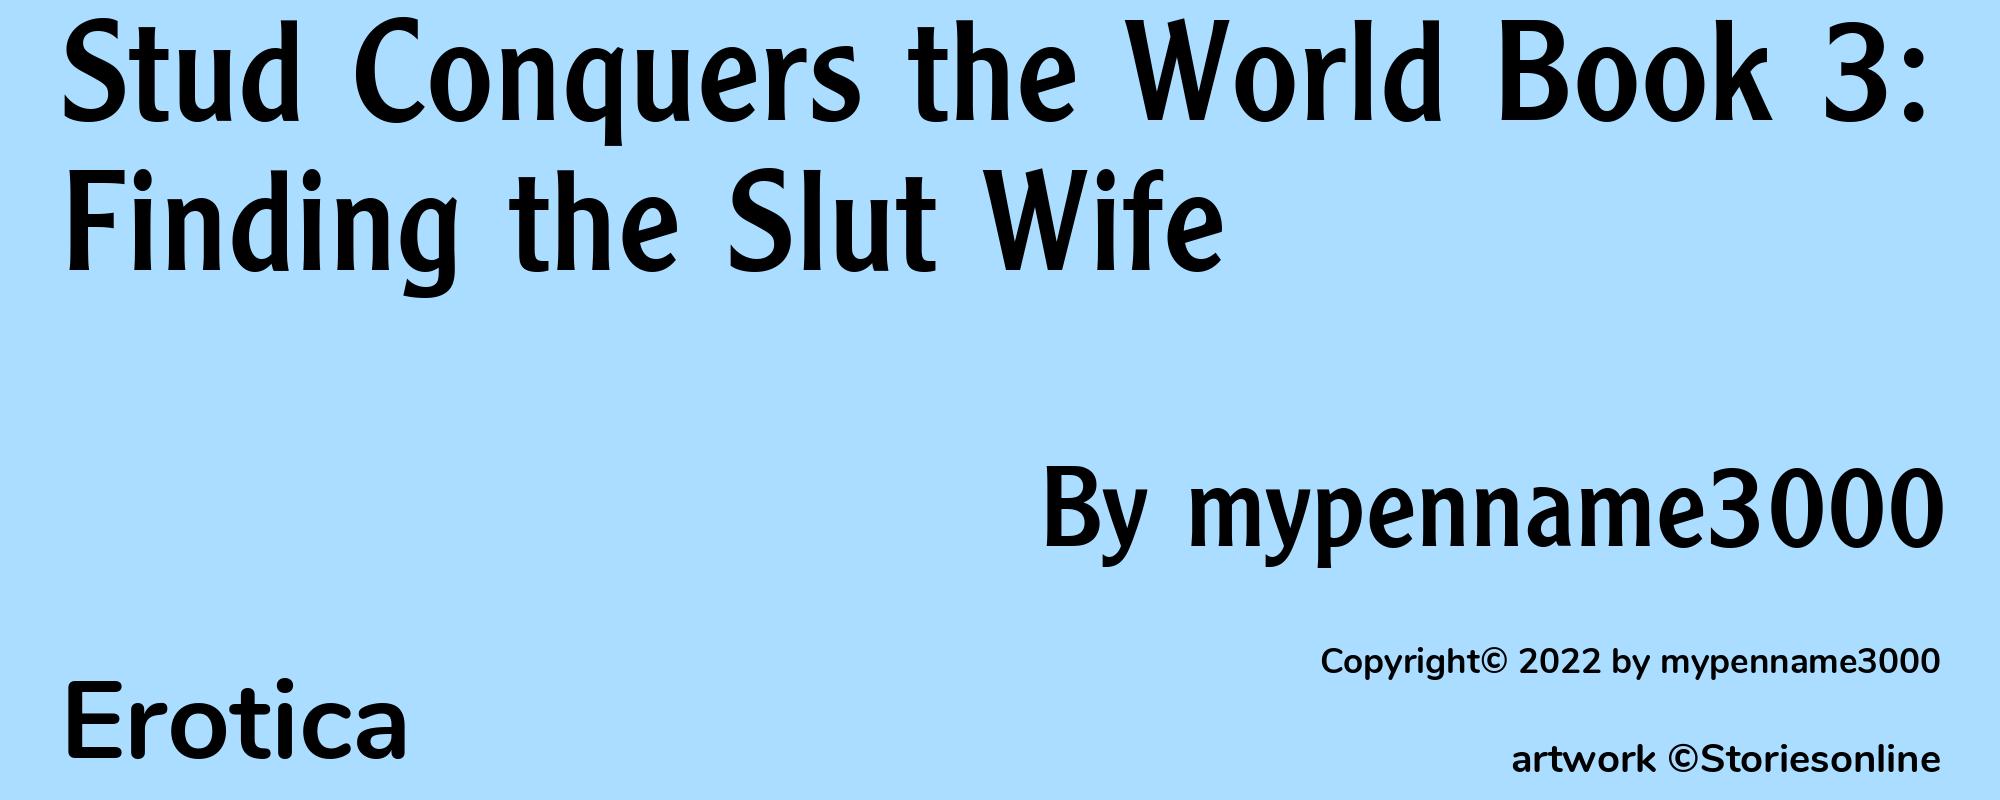 Stud Conquers the World Book 3: Finding the Slut Wife - Cover